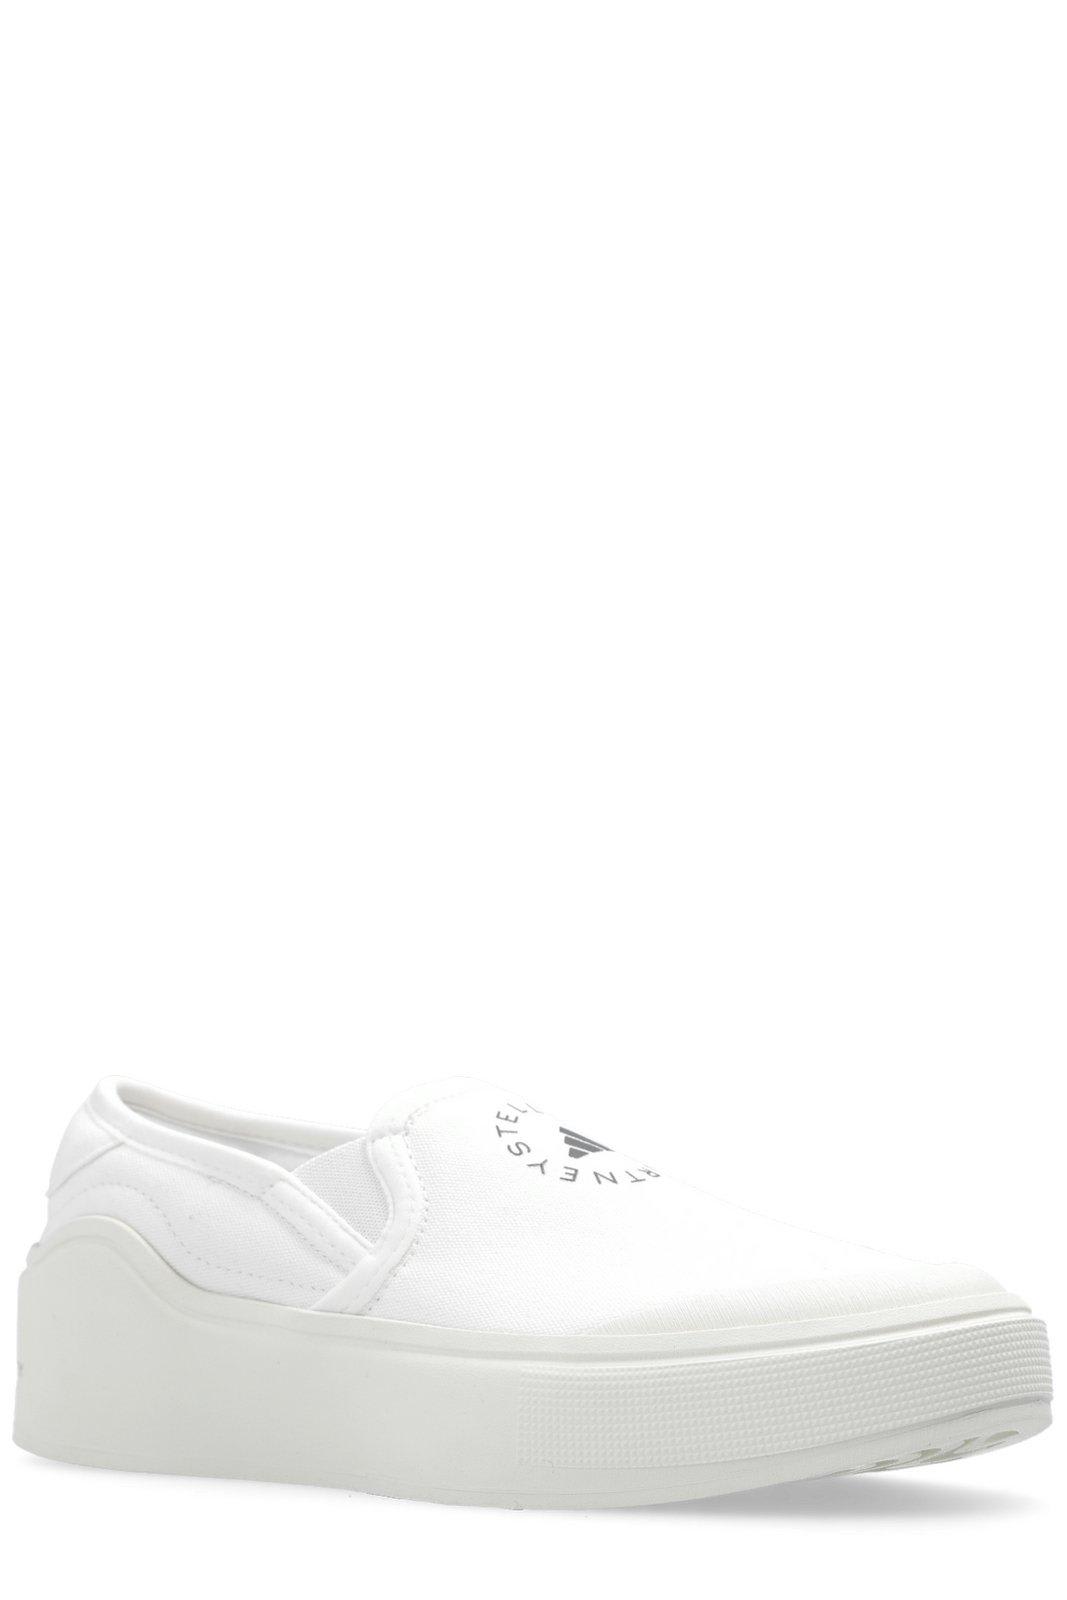 Shop Adidas By Stella Mccartney Court Slip-on Sneakers